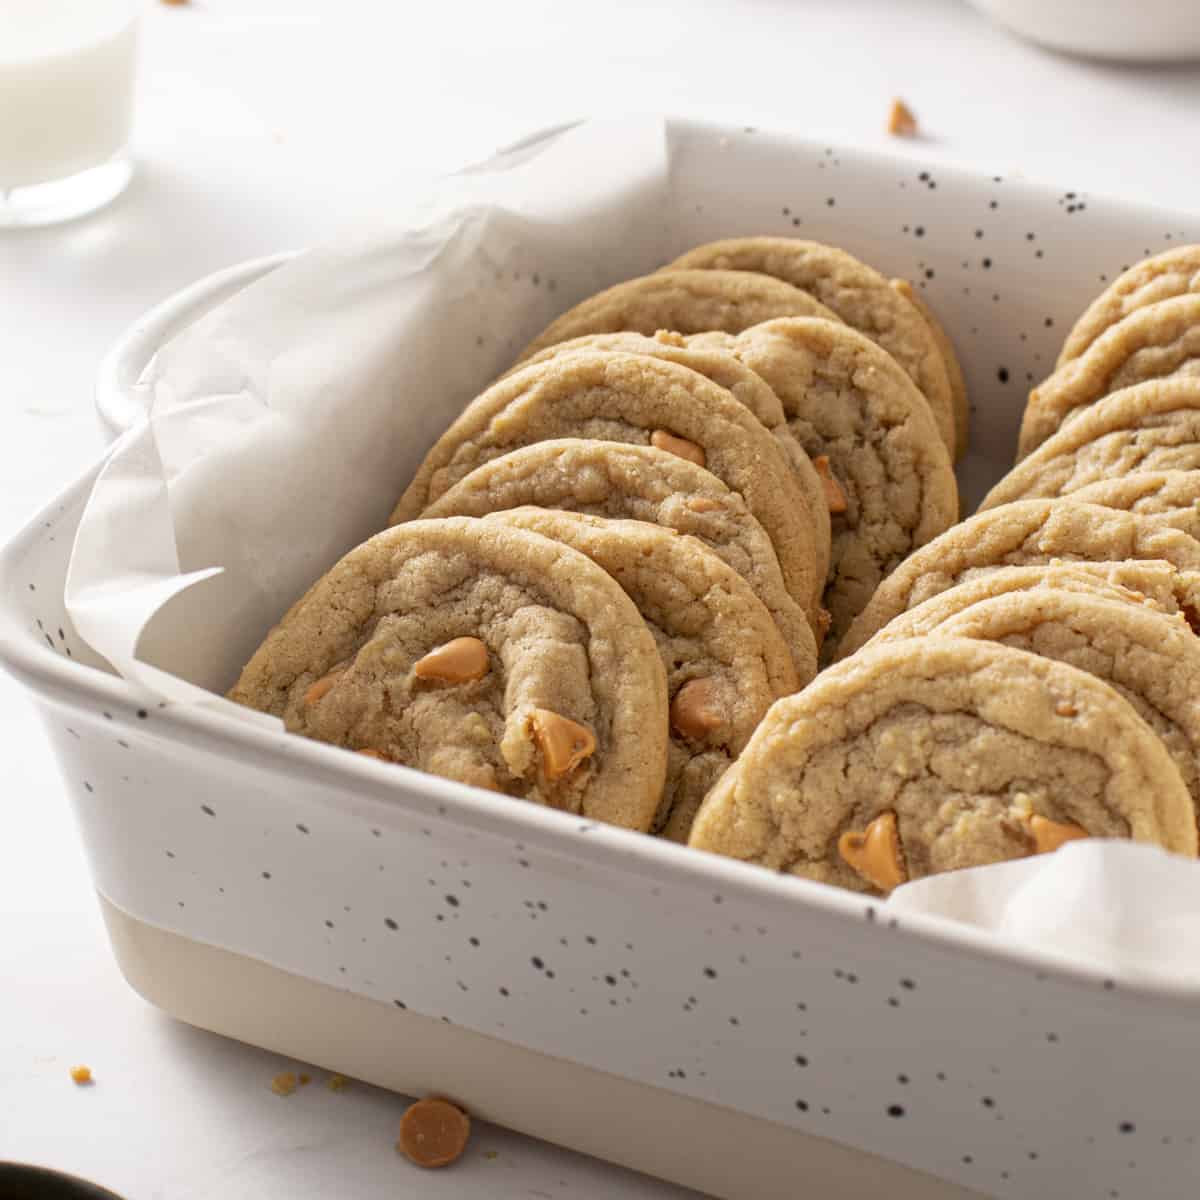 Cookies in a dish.